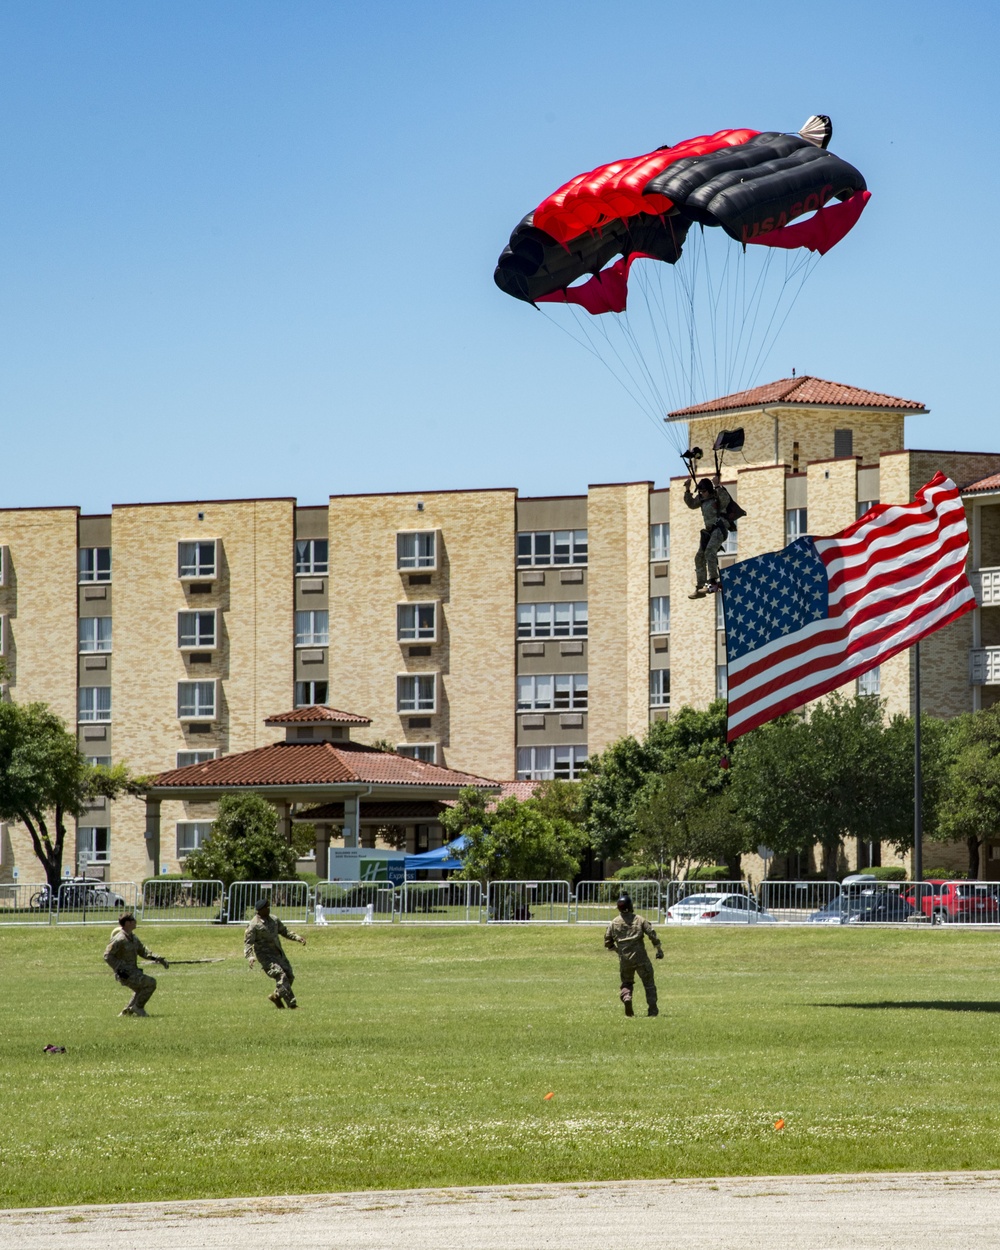 JBSA hosts Military City USA for Fiesta and Fireworks Extravaganza